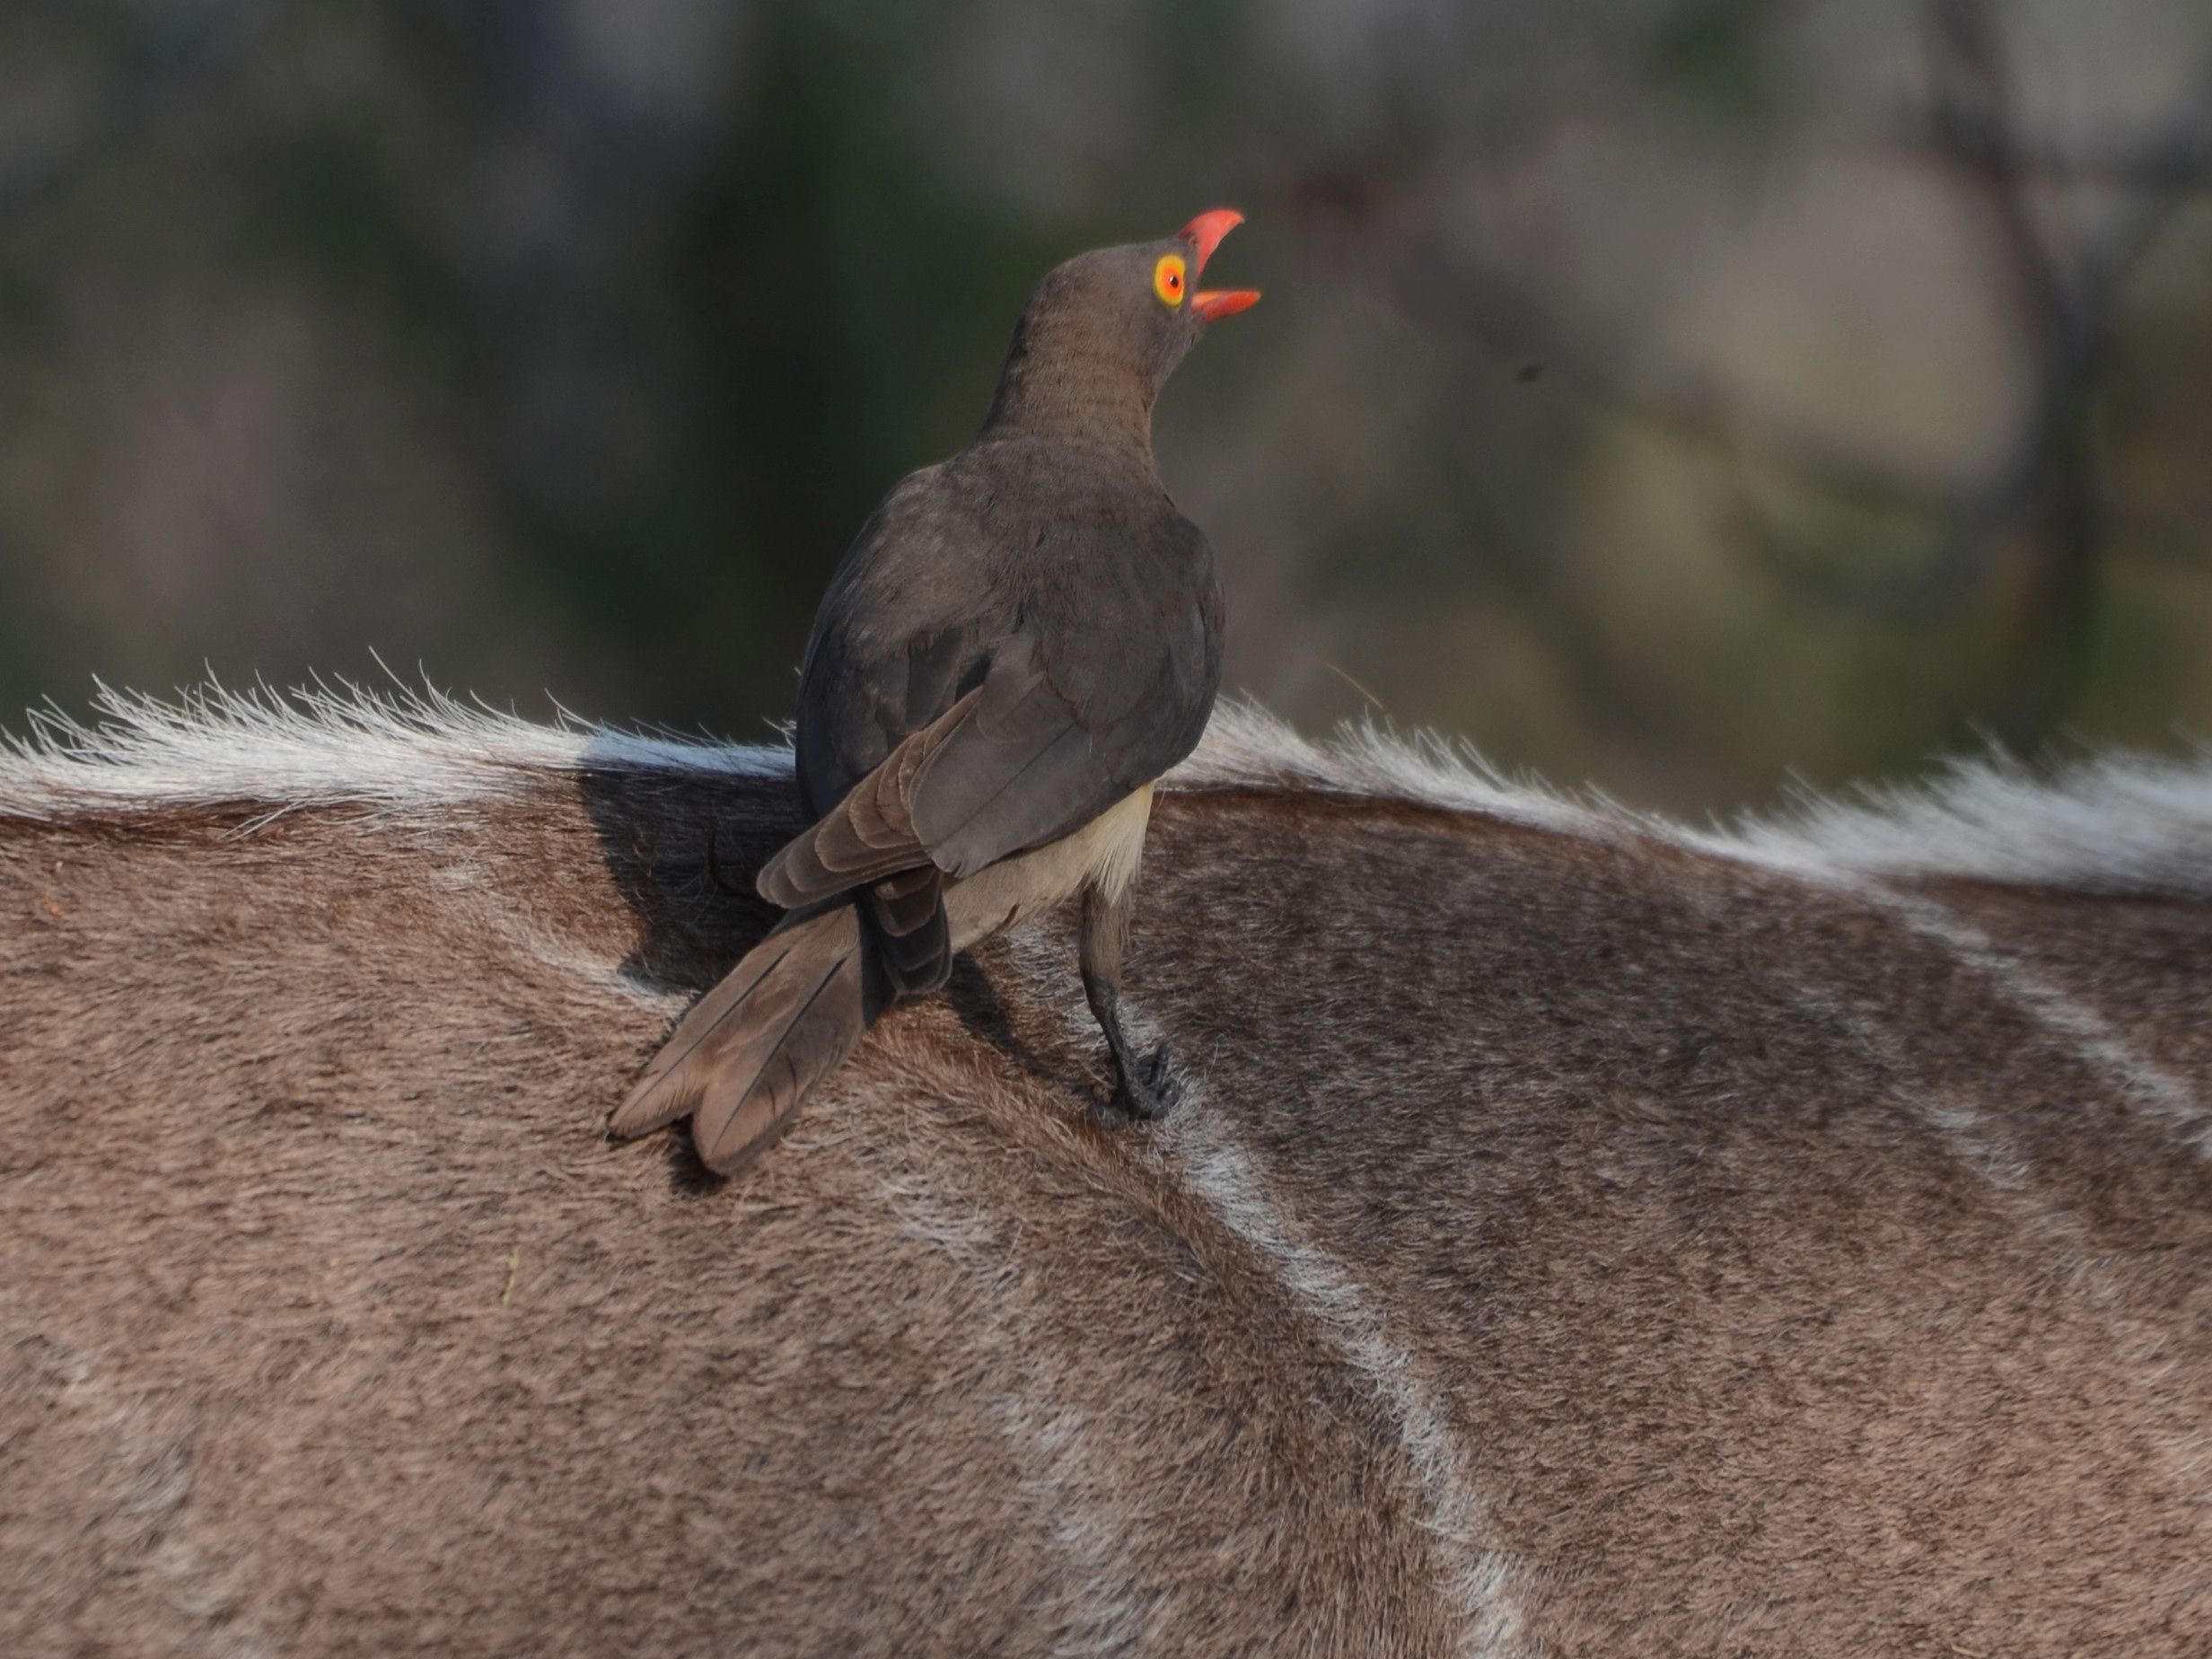 Click picture to see more Red-billed Oxpeckers.